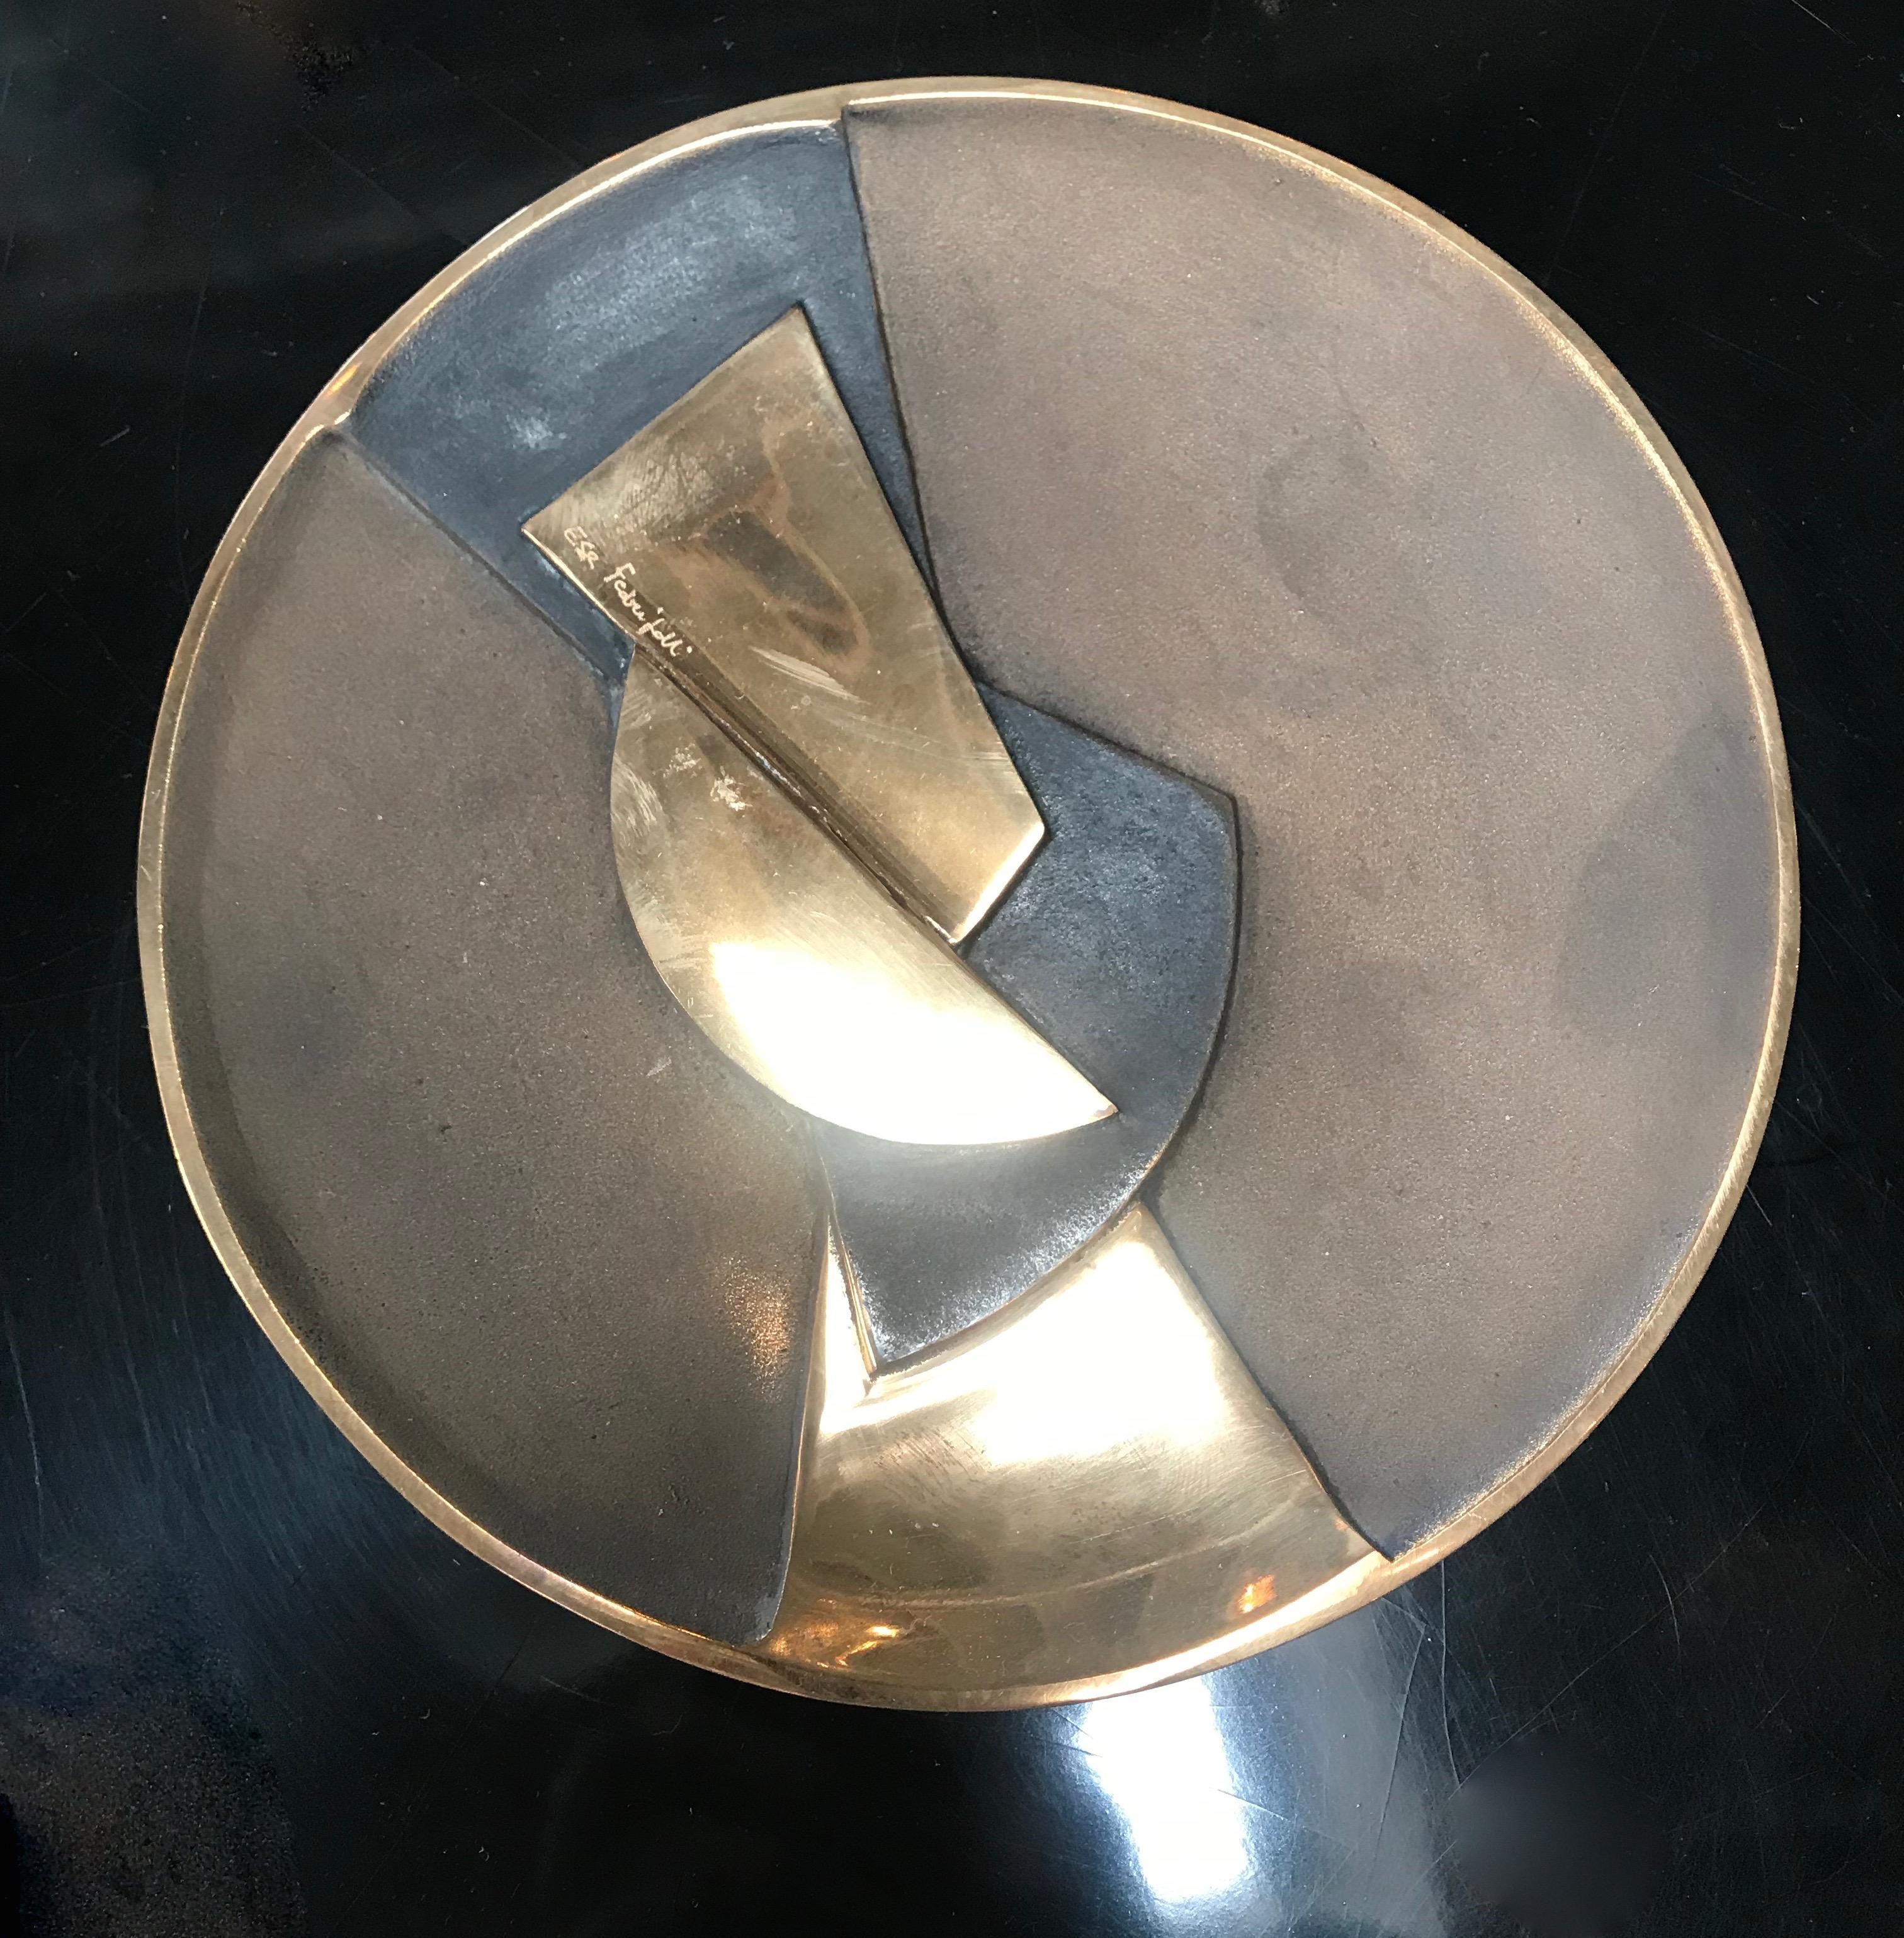 Plate/Ashtray hand-finished in three color bronze signed by E. Fedrigolli. Italy 1980.
A large sculptural centrepiece by the Italian designer, Esa. Signed by the artist and “Certificate of Authenticity”.
Esa Fedrigolli is an Italian visual artist